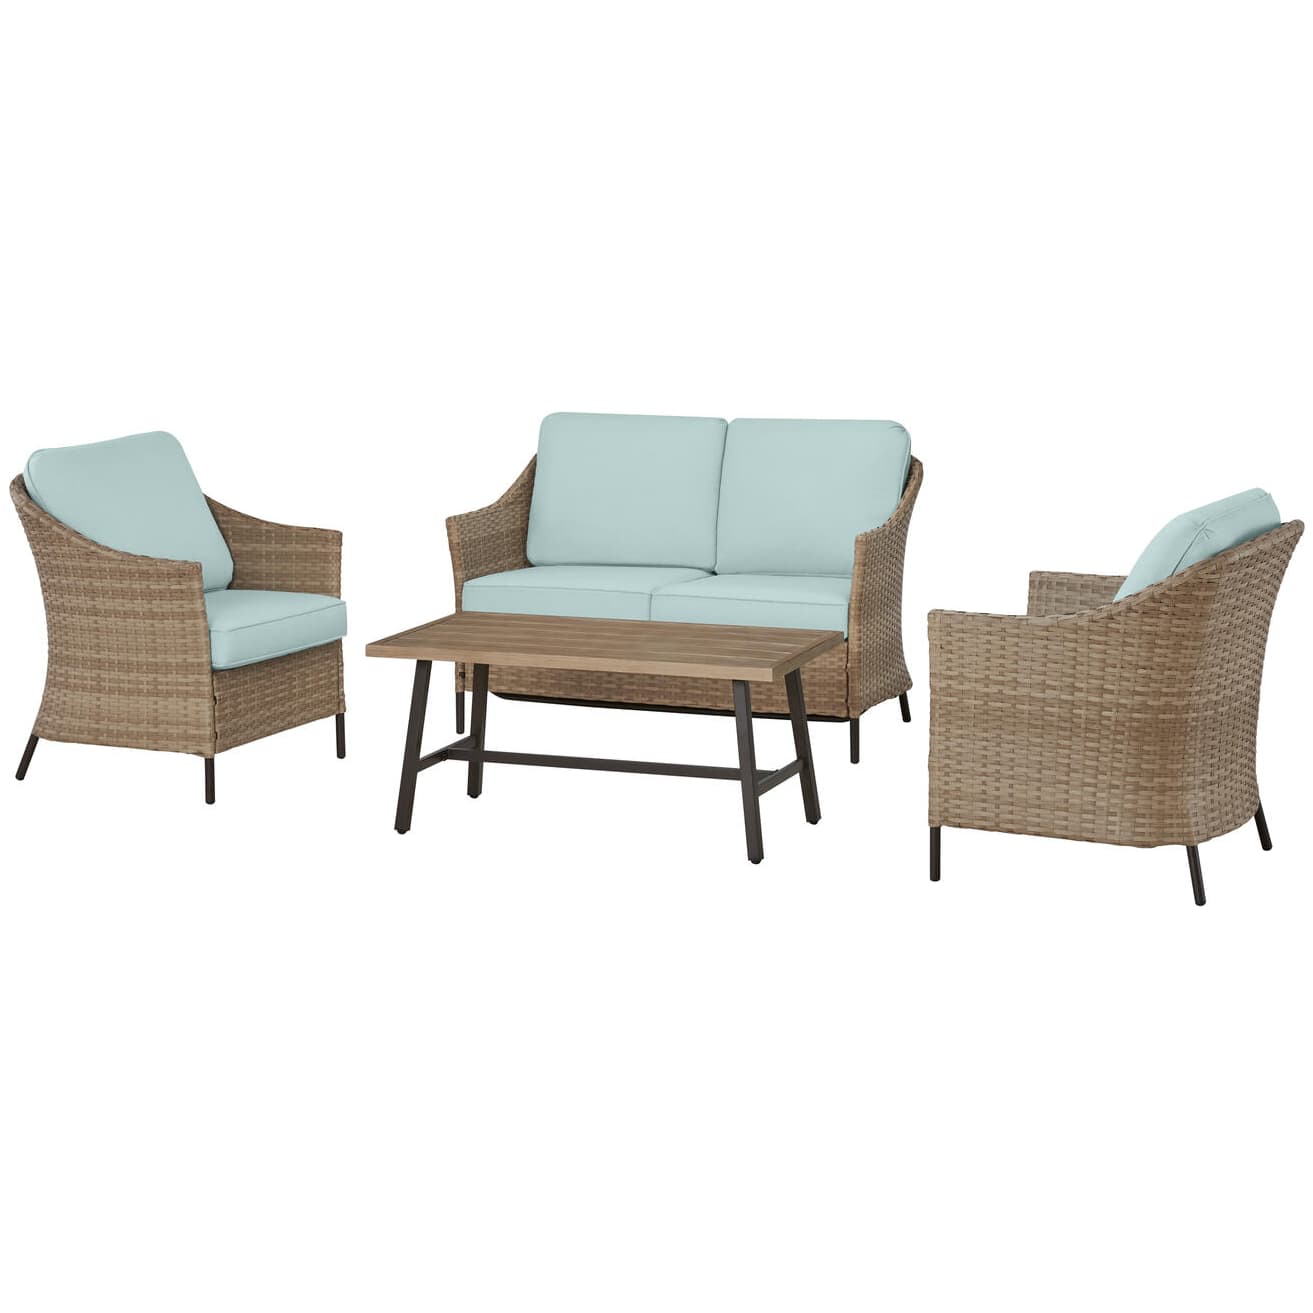 Image for Patio Furniture